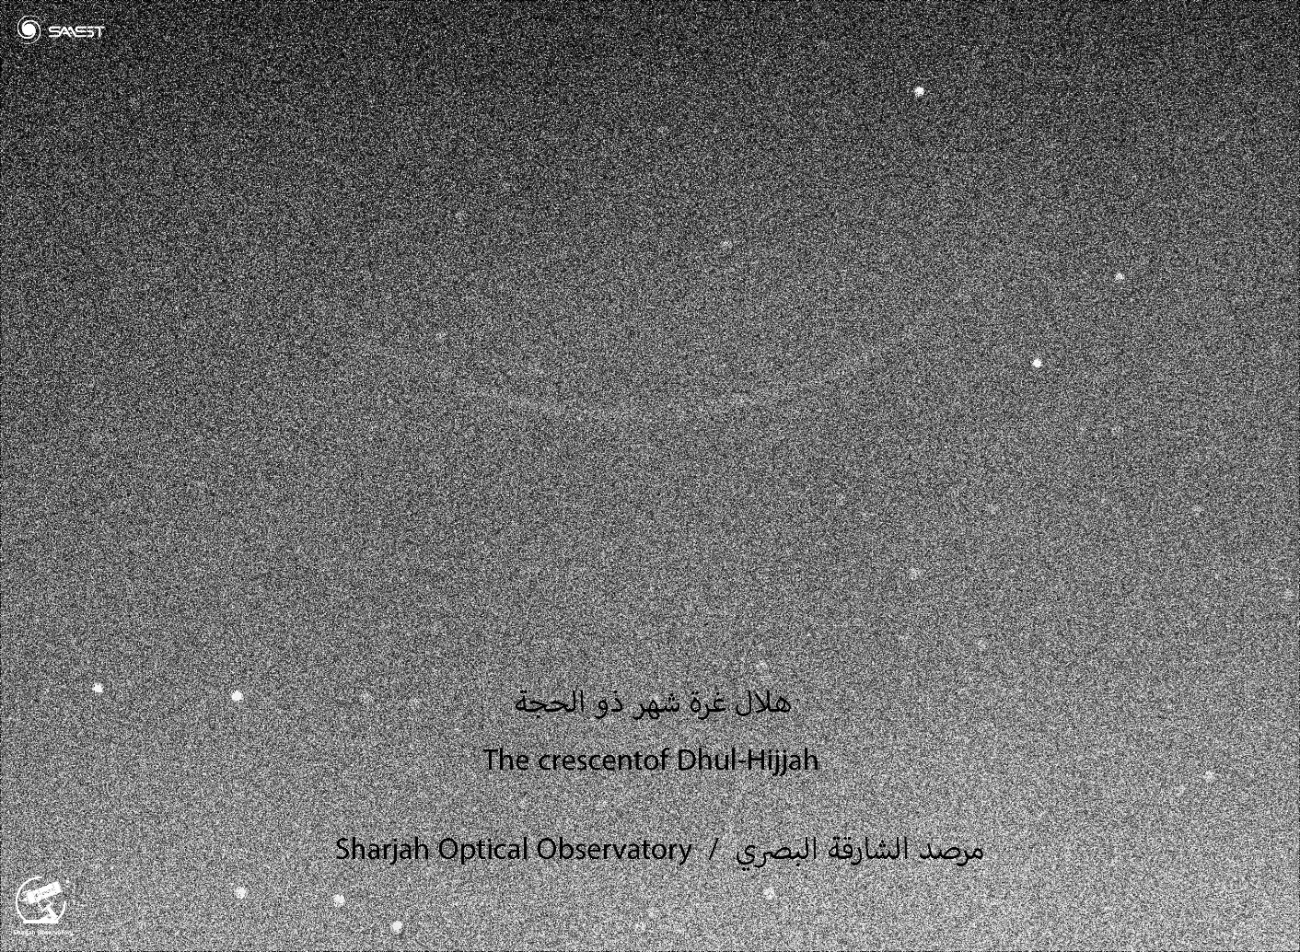 Observations of the Crescent of Dhu’l Hijjah on June 30, 2022